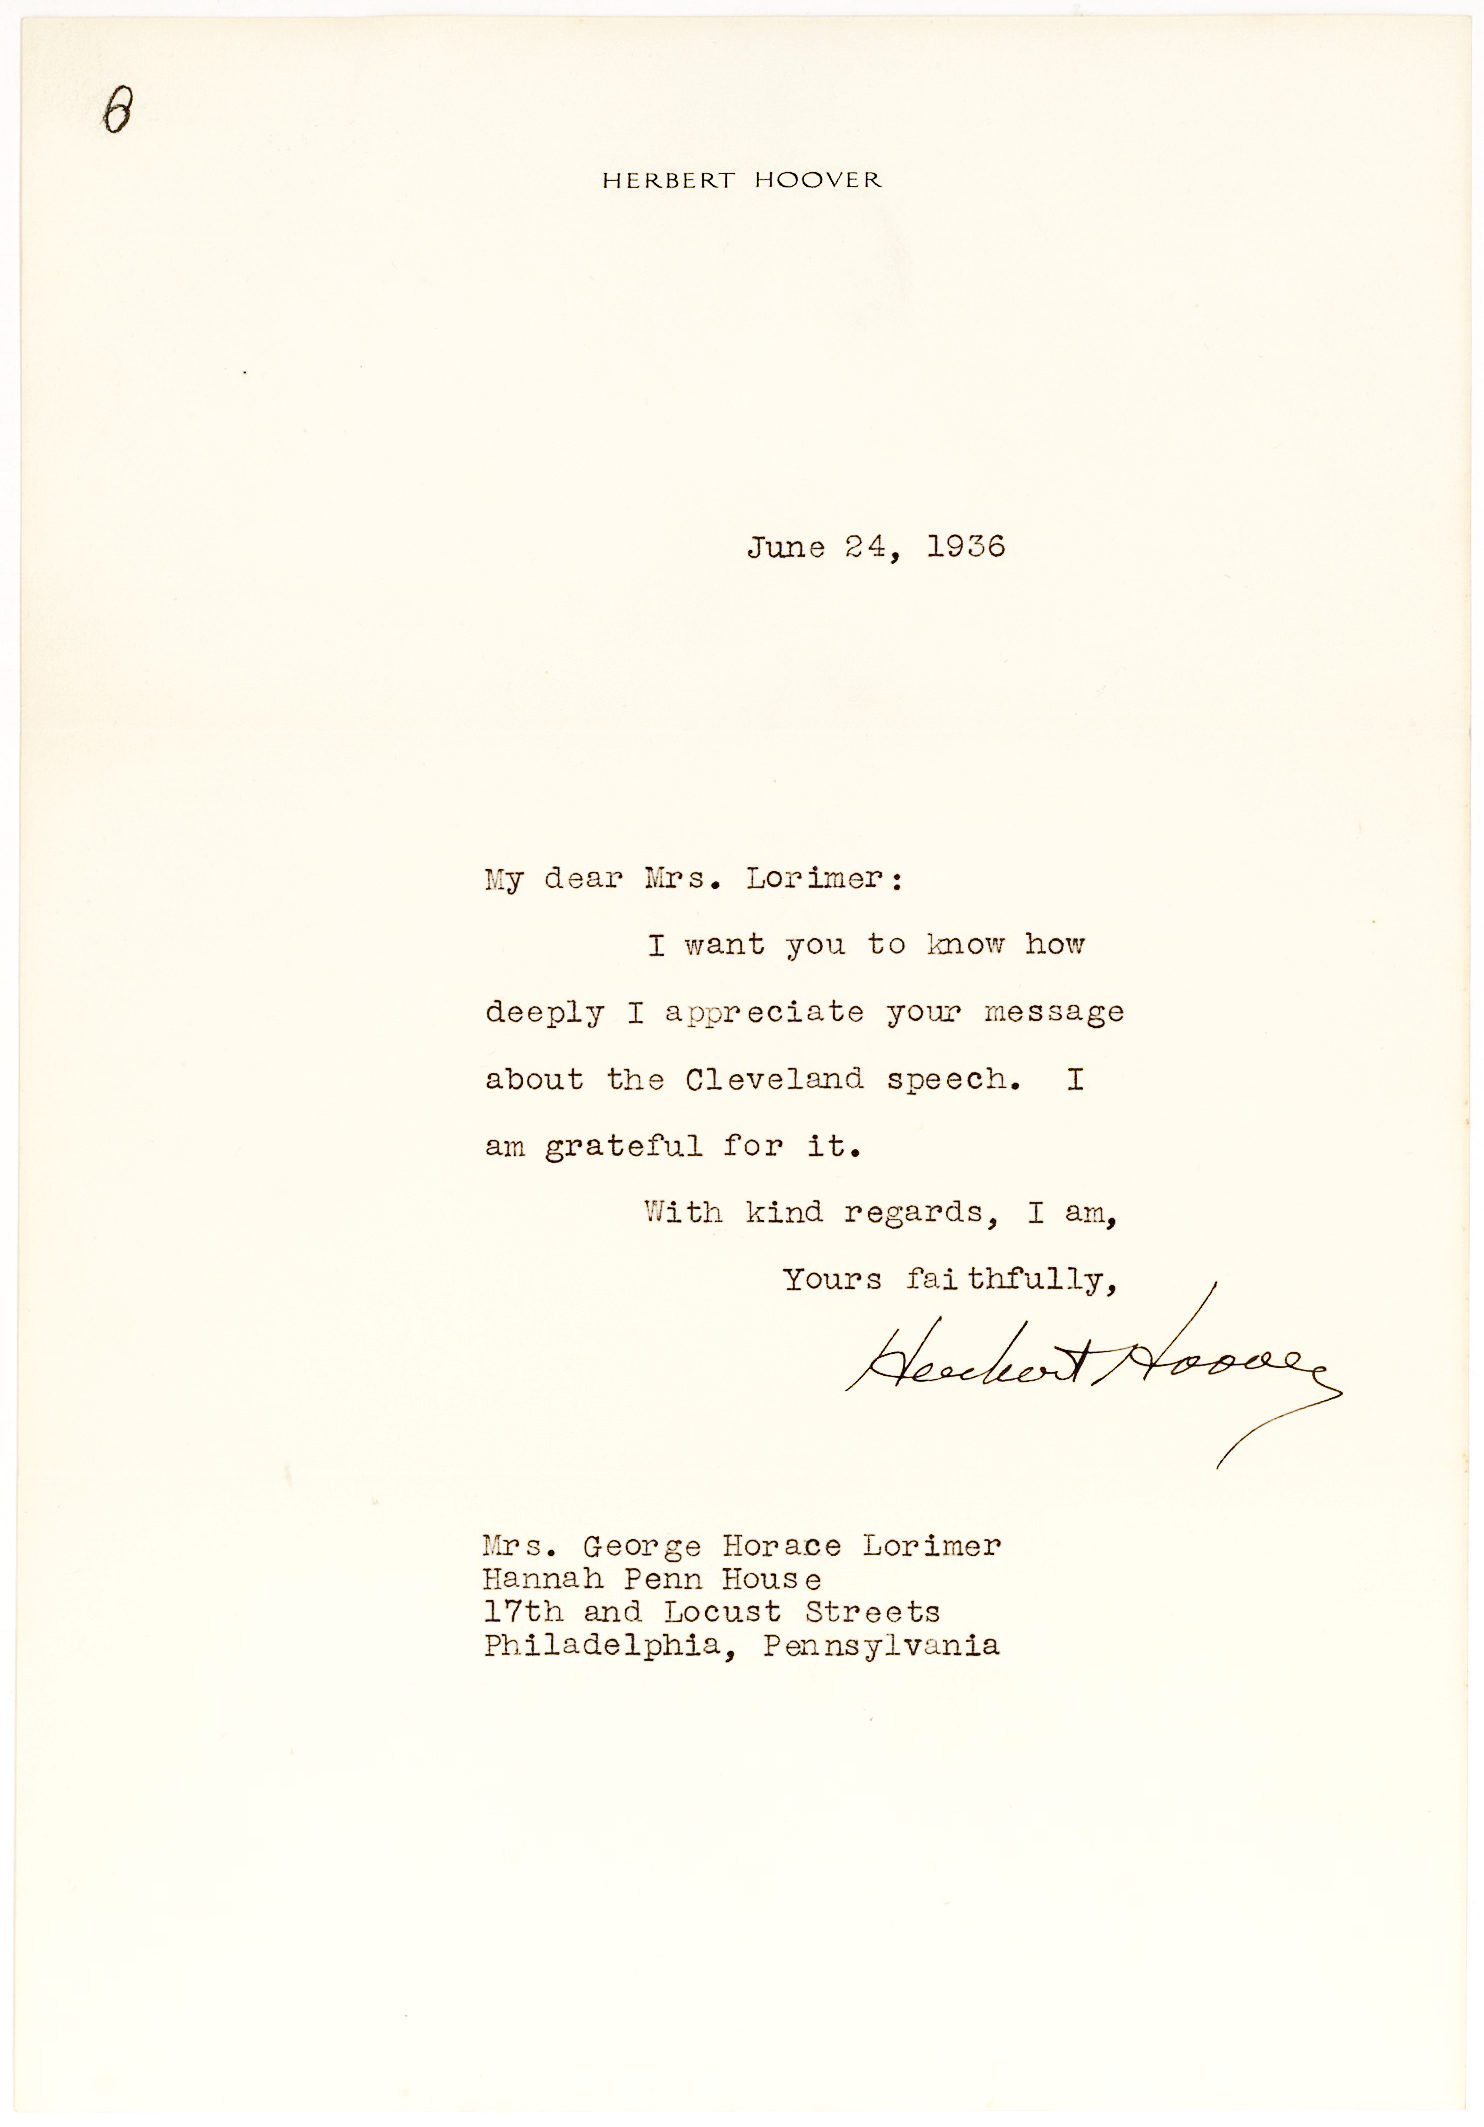 Herbert Hoover Thanks the Wife of Publishing Giant George H. Lorimer for her Compliments on his Speech in Cleveland